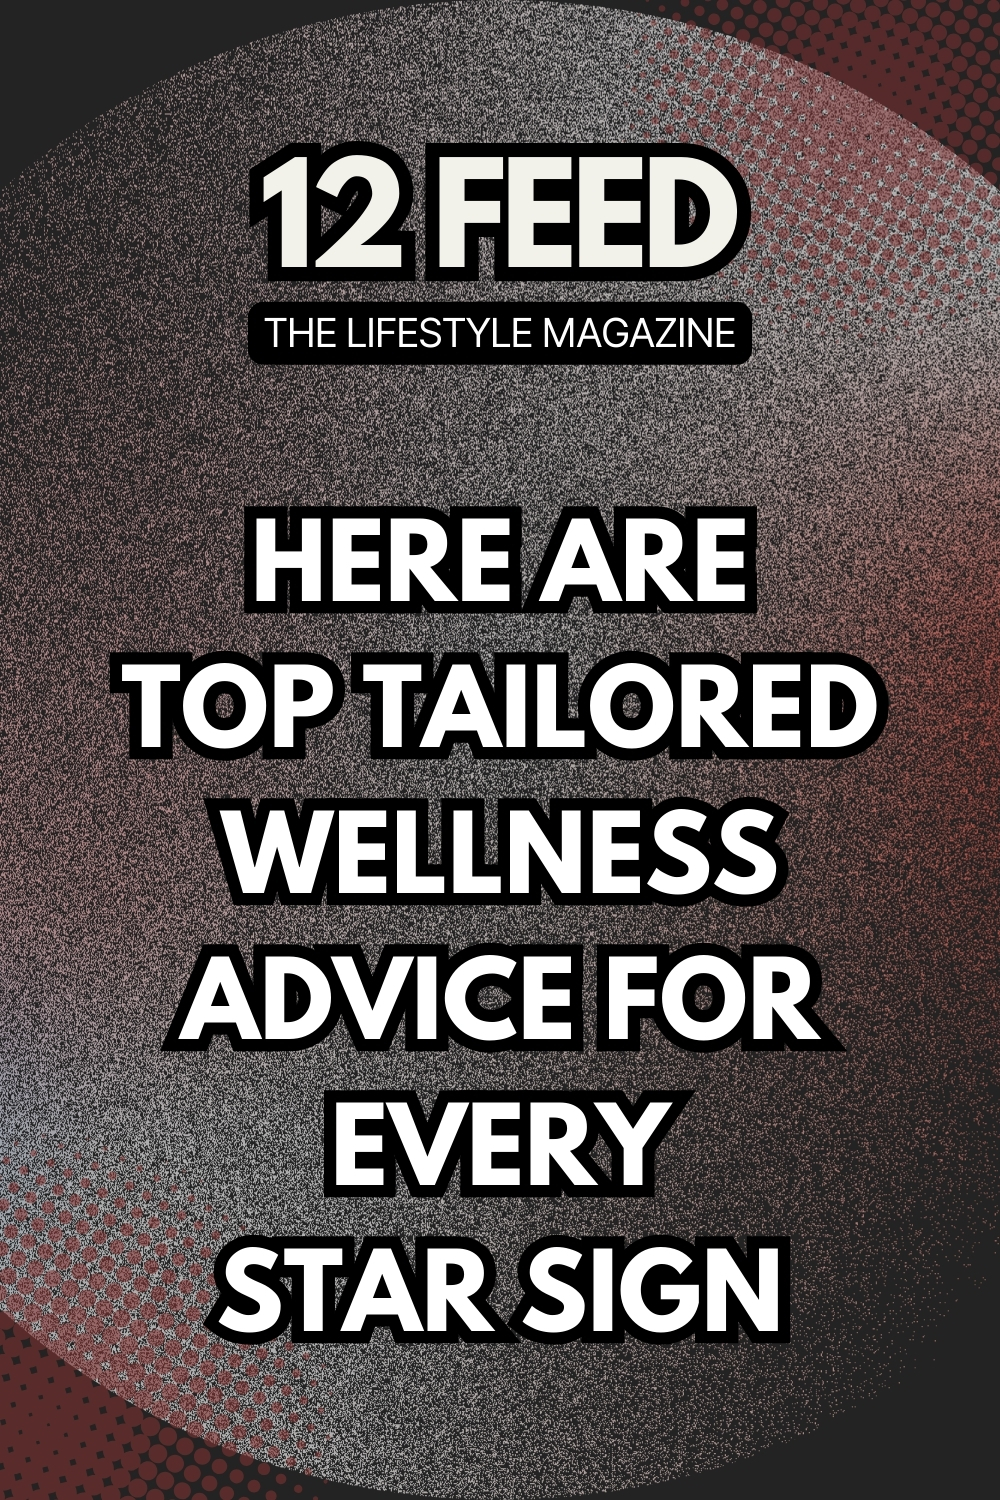 Here are Top Tailored Wellness Advice for Every Star Sign